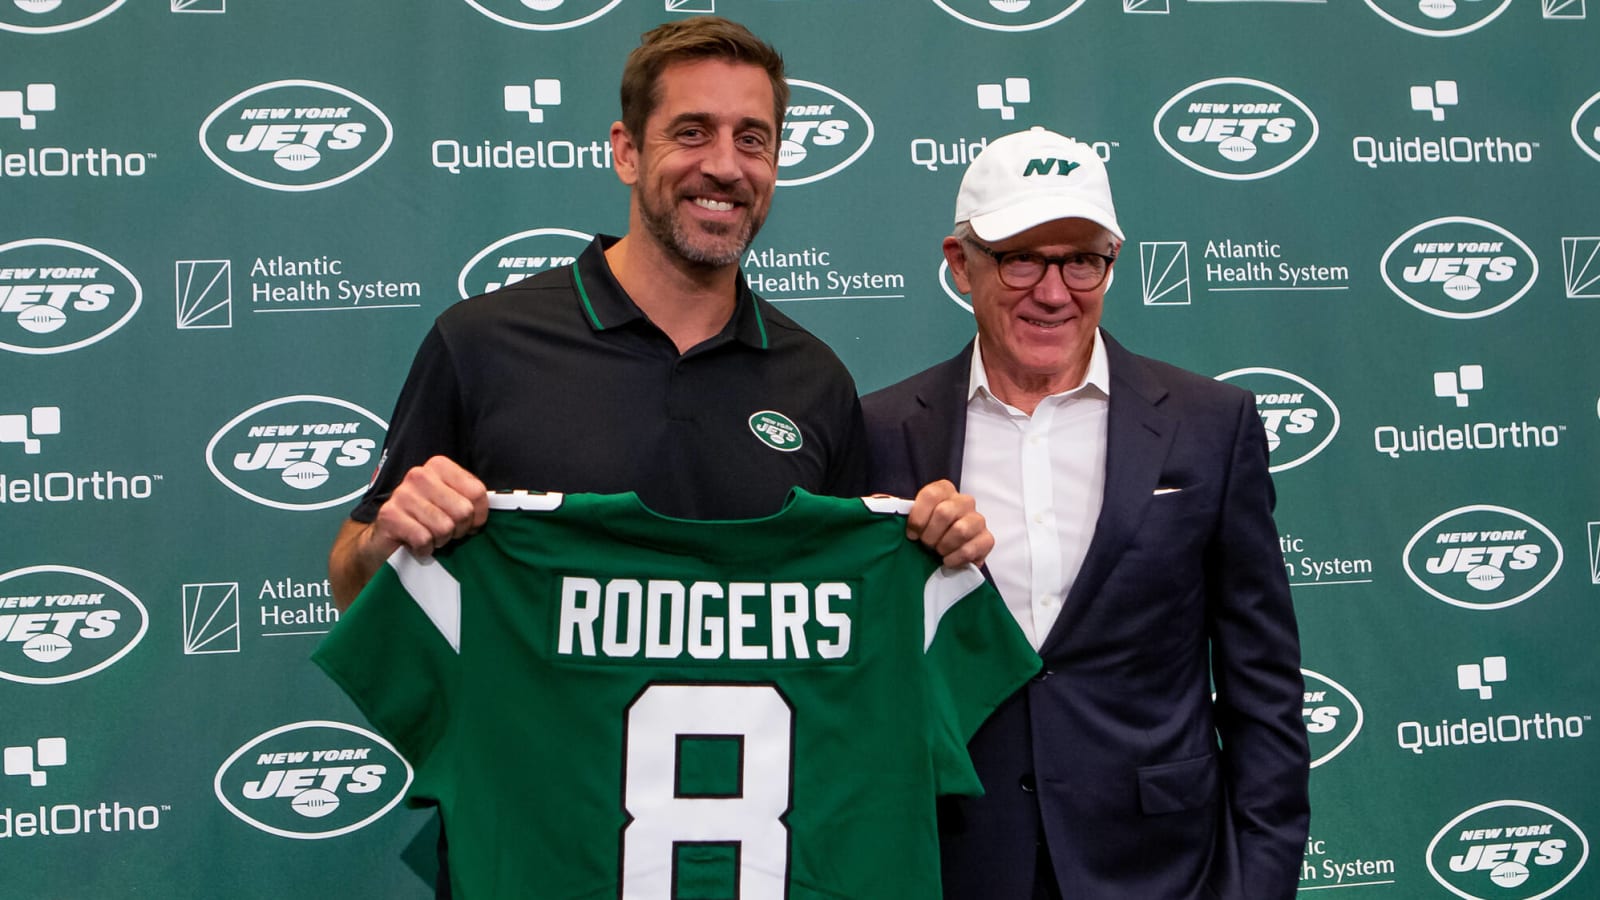 Aaron Rodgers' Jets jersey among highest-selling NFL jerseys in June